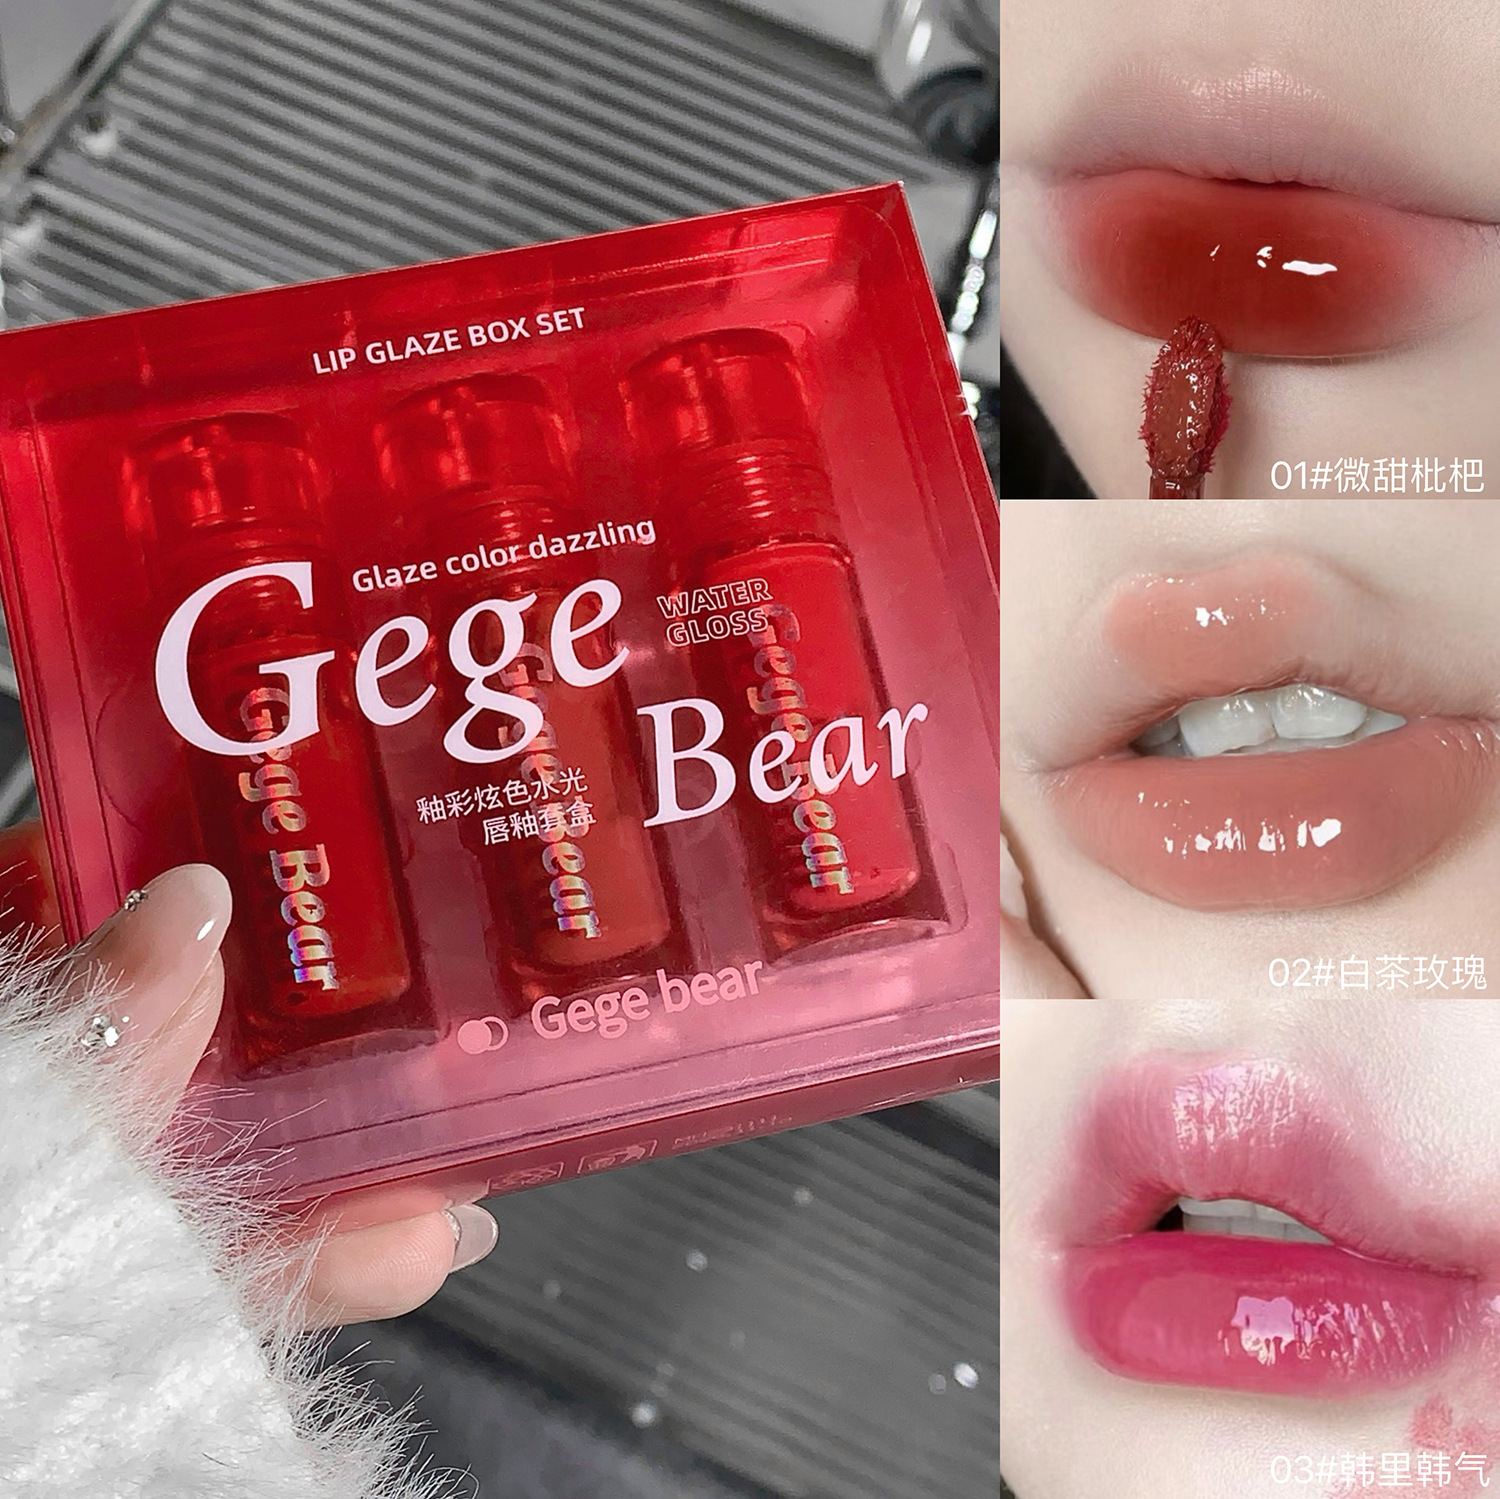 Gege Bear Gogo Bear Glaze and Colours Dazzling Water Light Lip Lacquer Set Box Full Lips Nourishing Waterproof No Stain on Cup